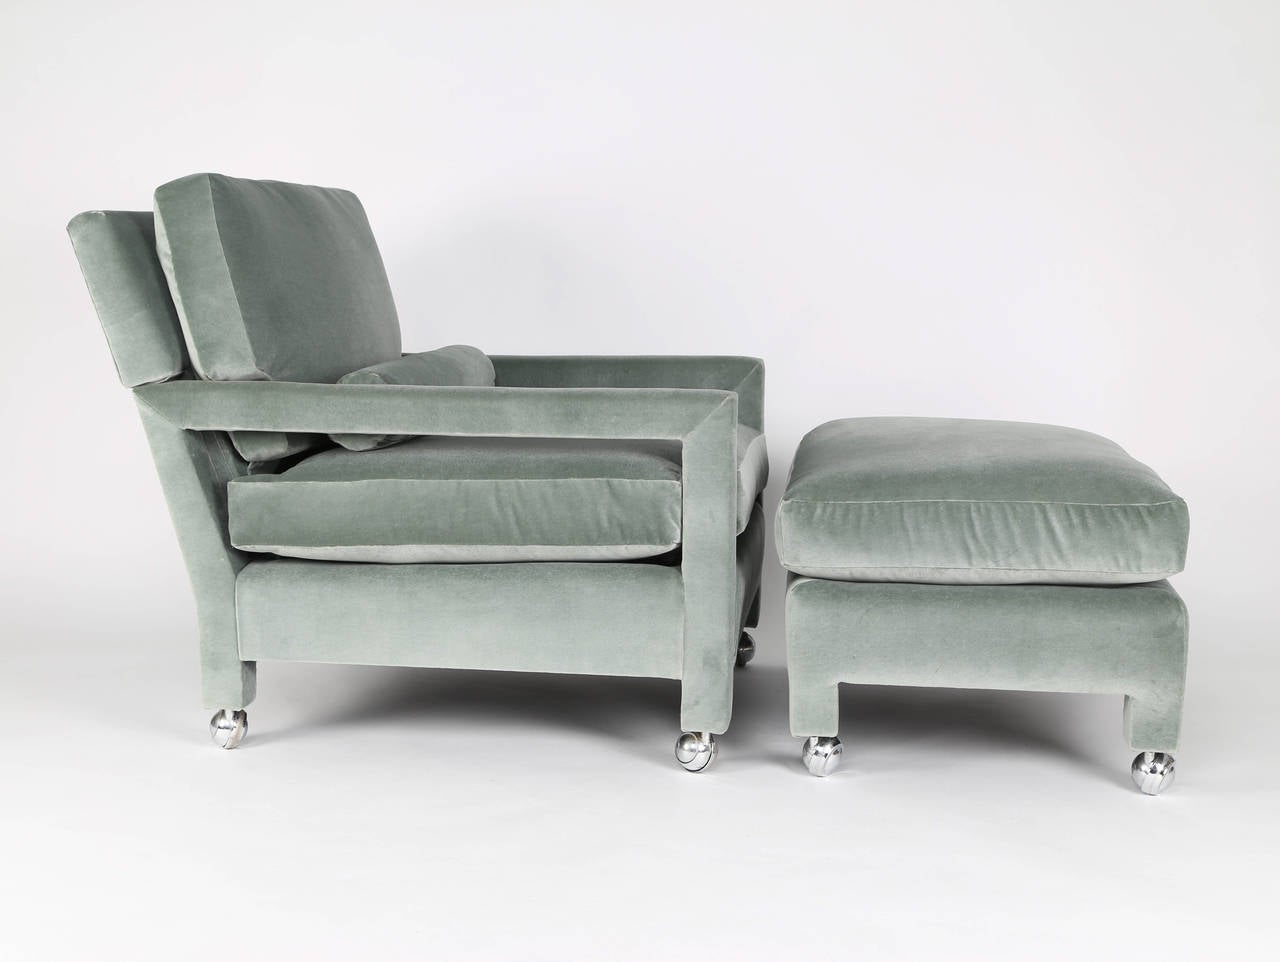 American Milo Baughman Reclining Lounge Chair and Ottoman on Casters